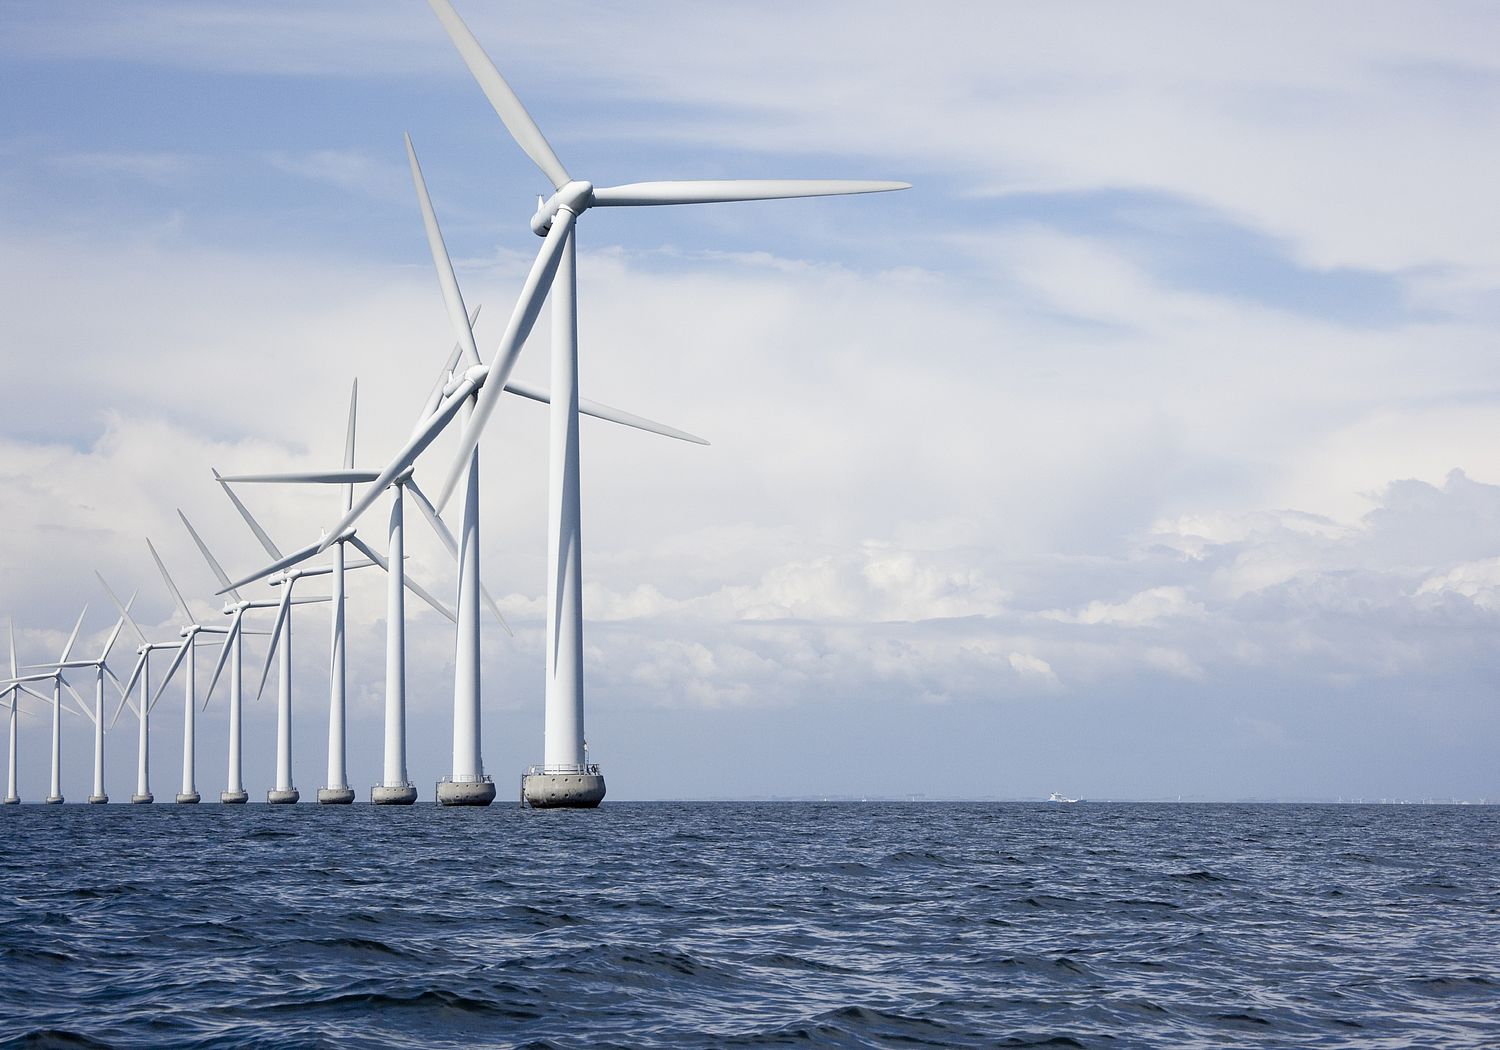 Image showing Long row of very tall offshore wind turbines